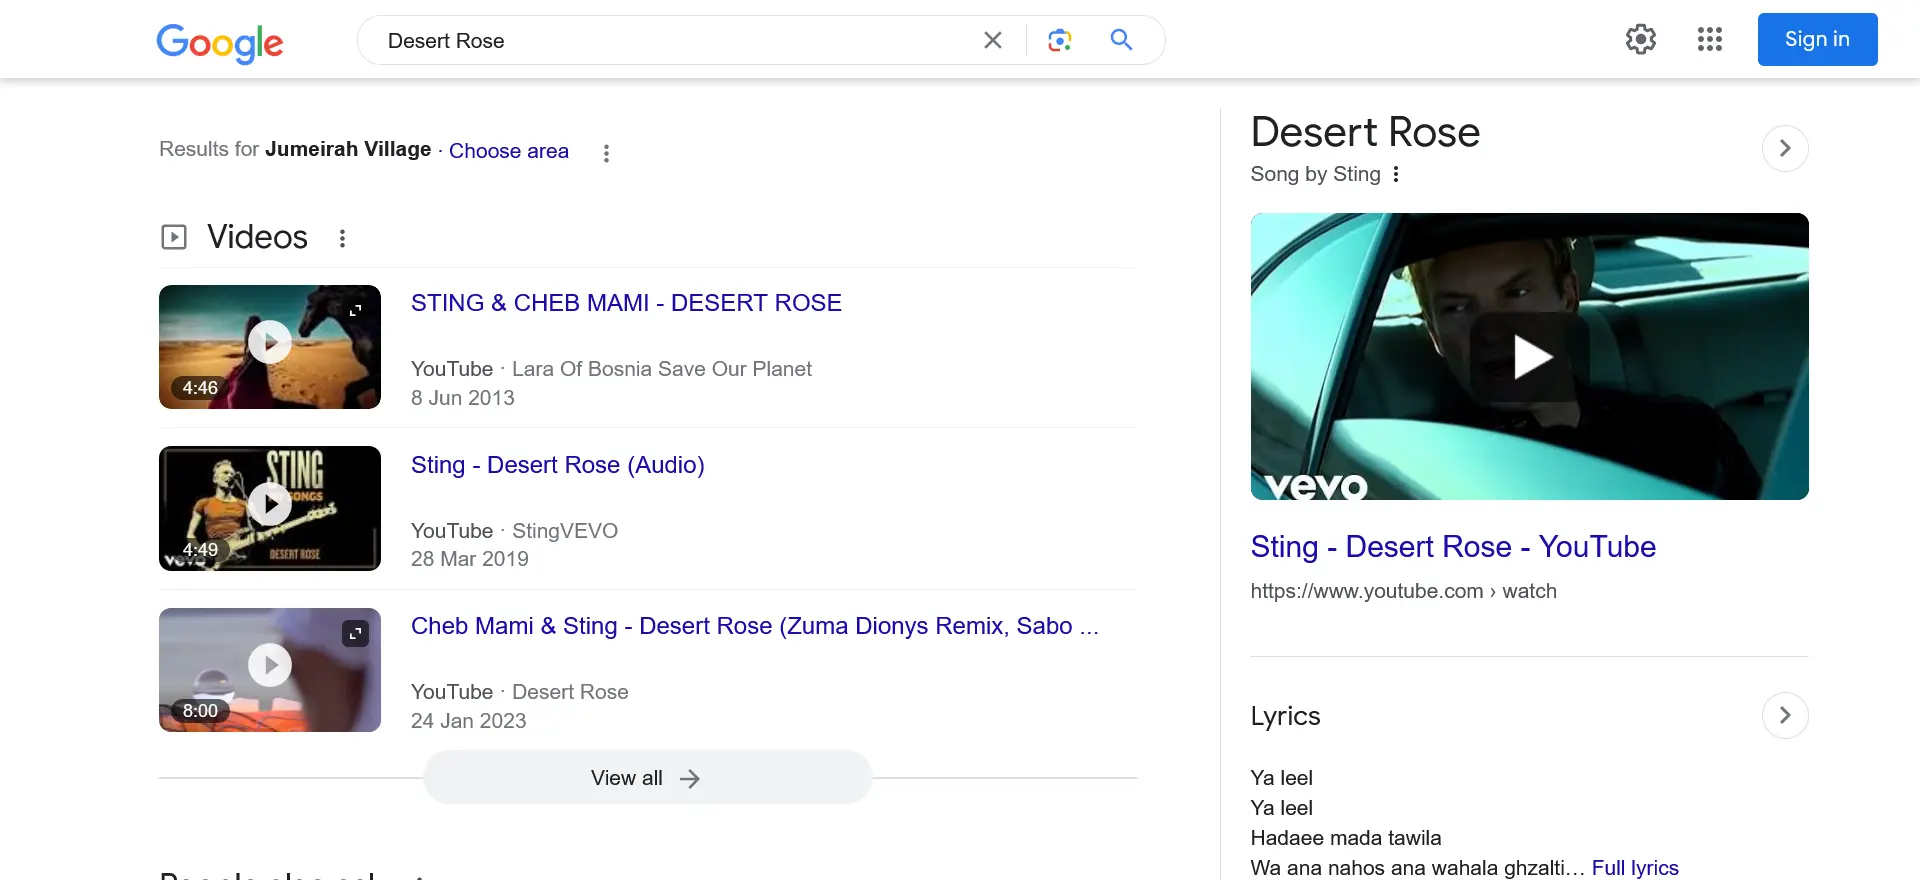 Video in Search Engine. Video Carousel Search Results.